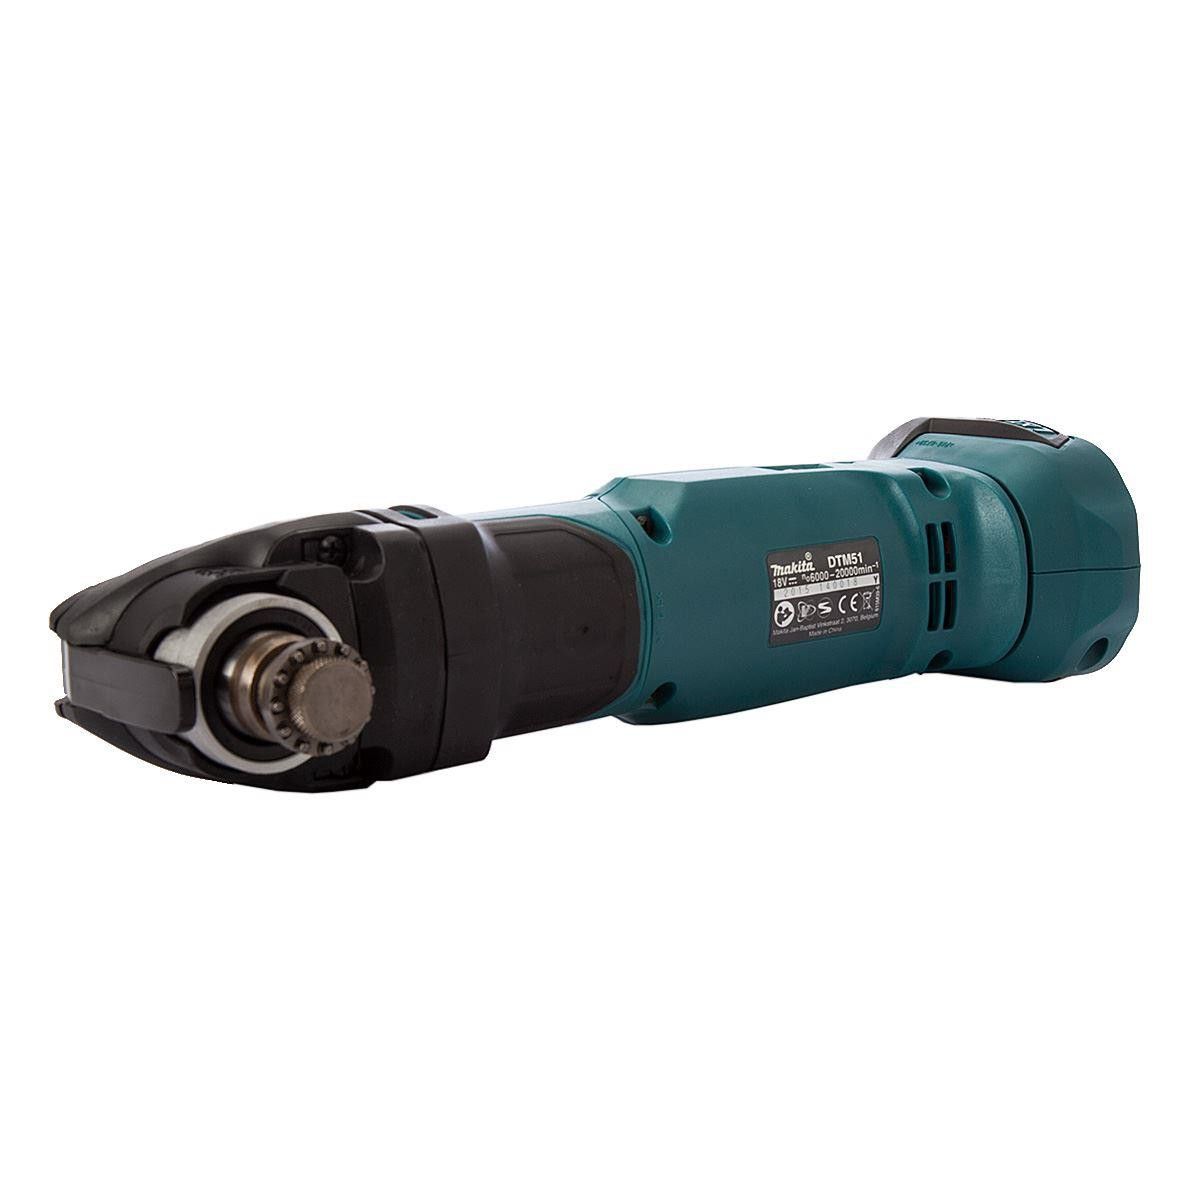 Makita 18v Ois Multi Tool Quick Change MAKDTM51Z1 | Accepts OIS Makita, Bosch & Fein accessories, including Starlock | toolforce.ie